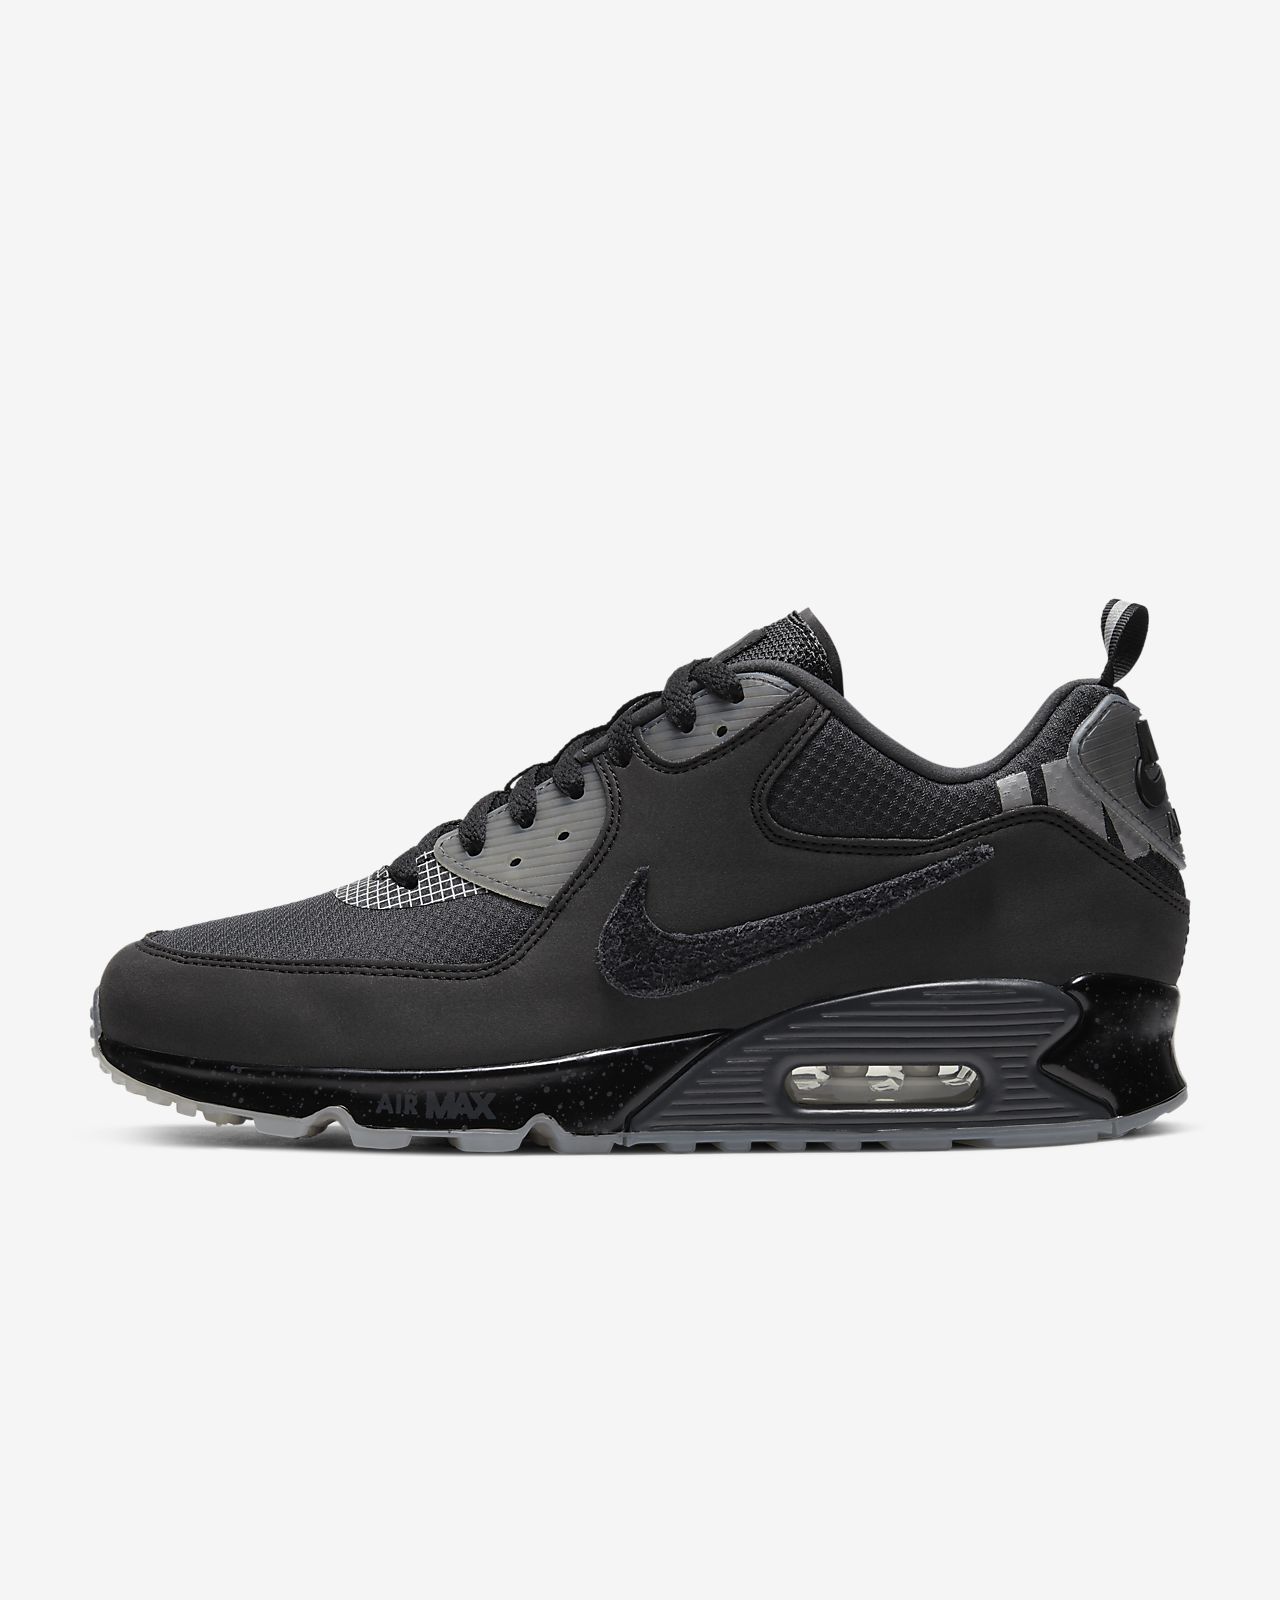 undefeated air max 90 where to buy